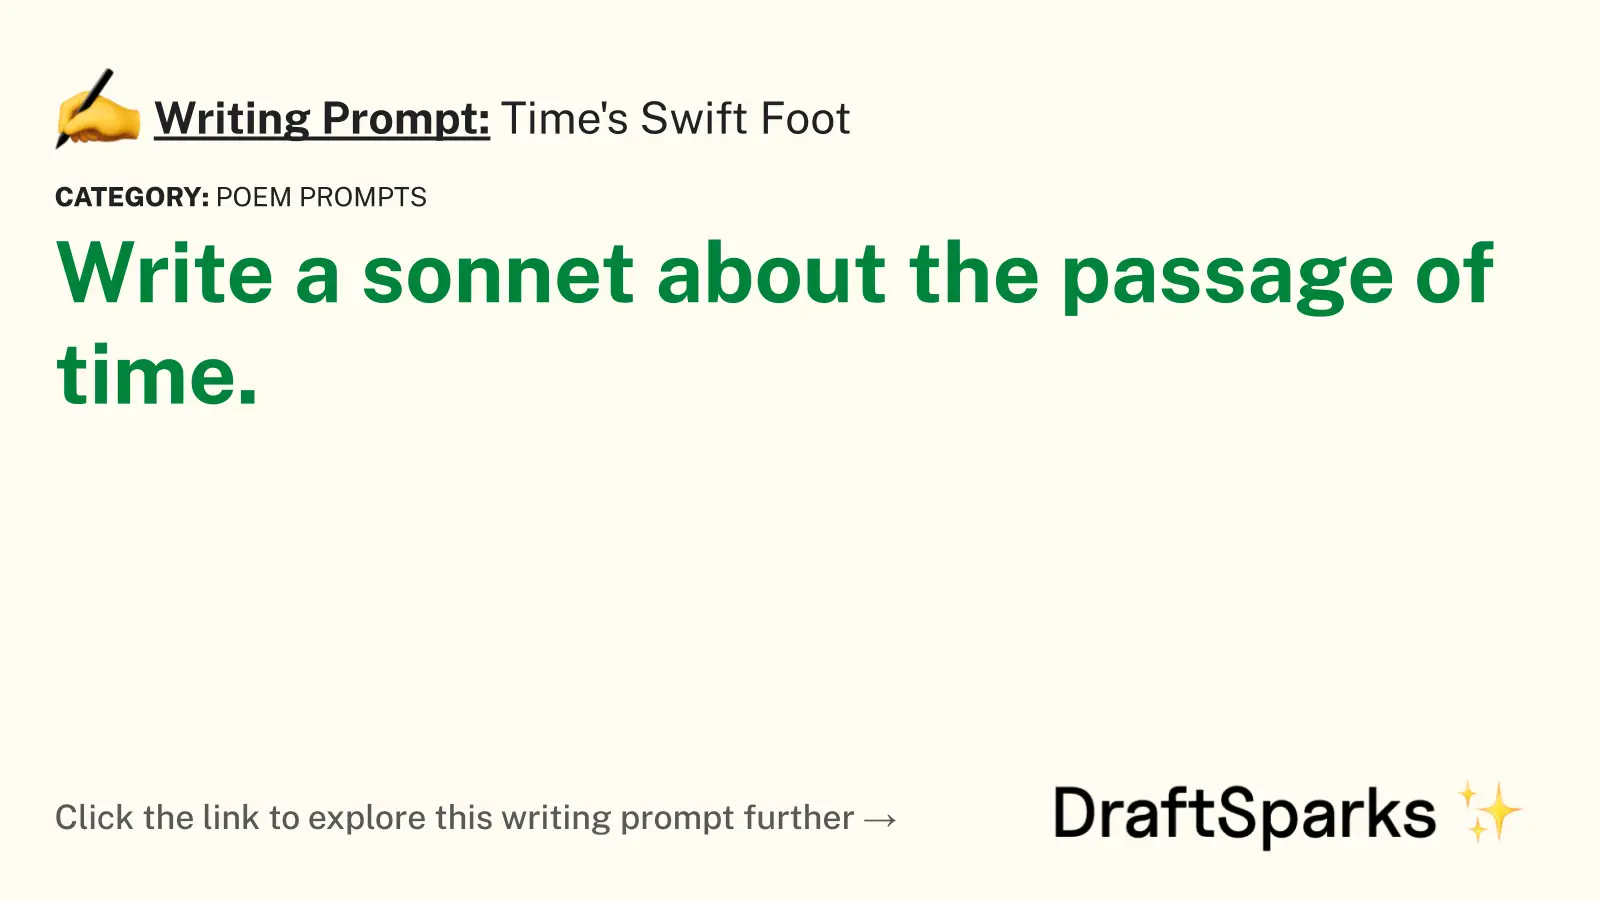 Time’s Swift Foot